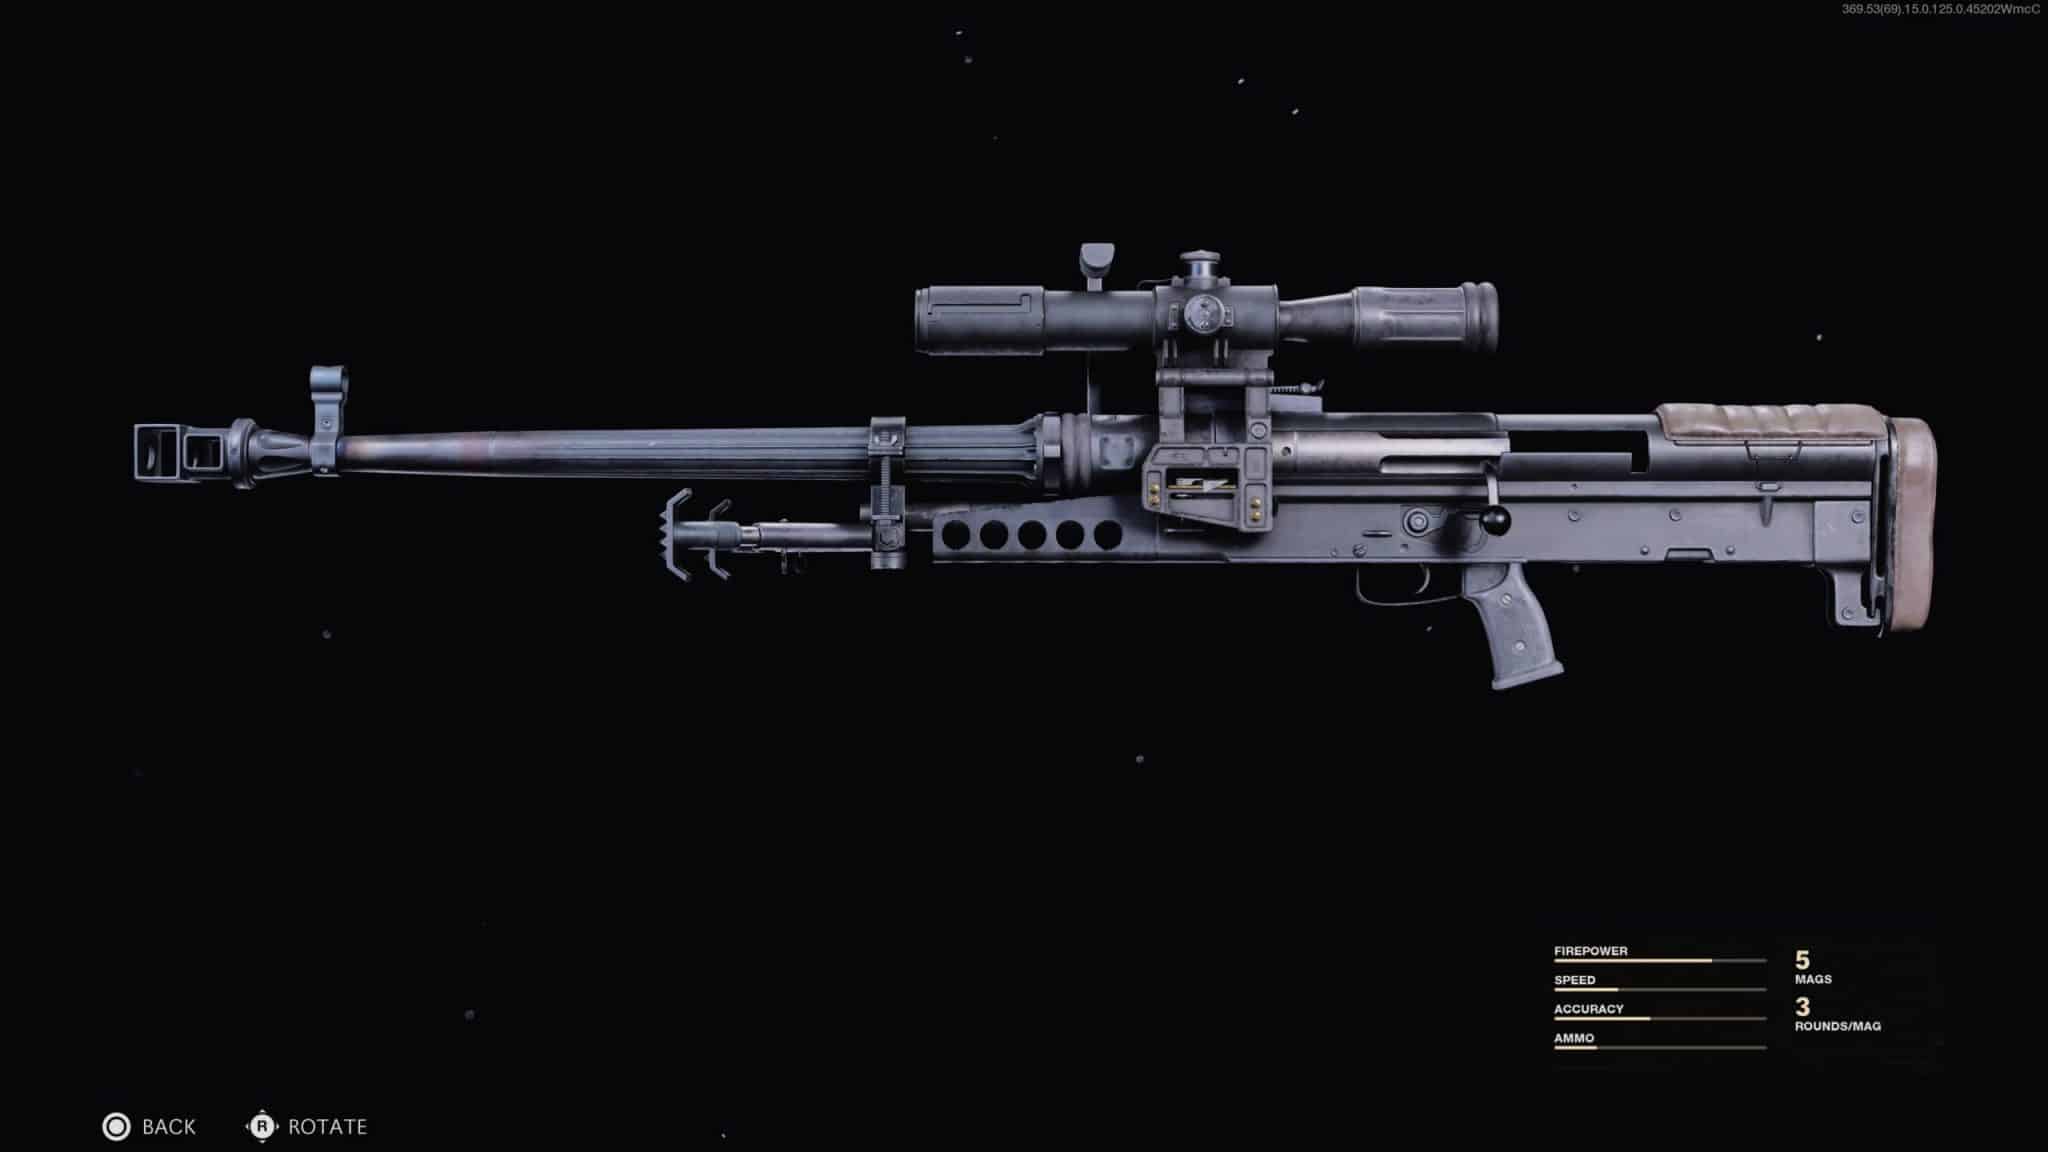 New ZRG sniper rifle in black ops cold war and warzone